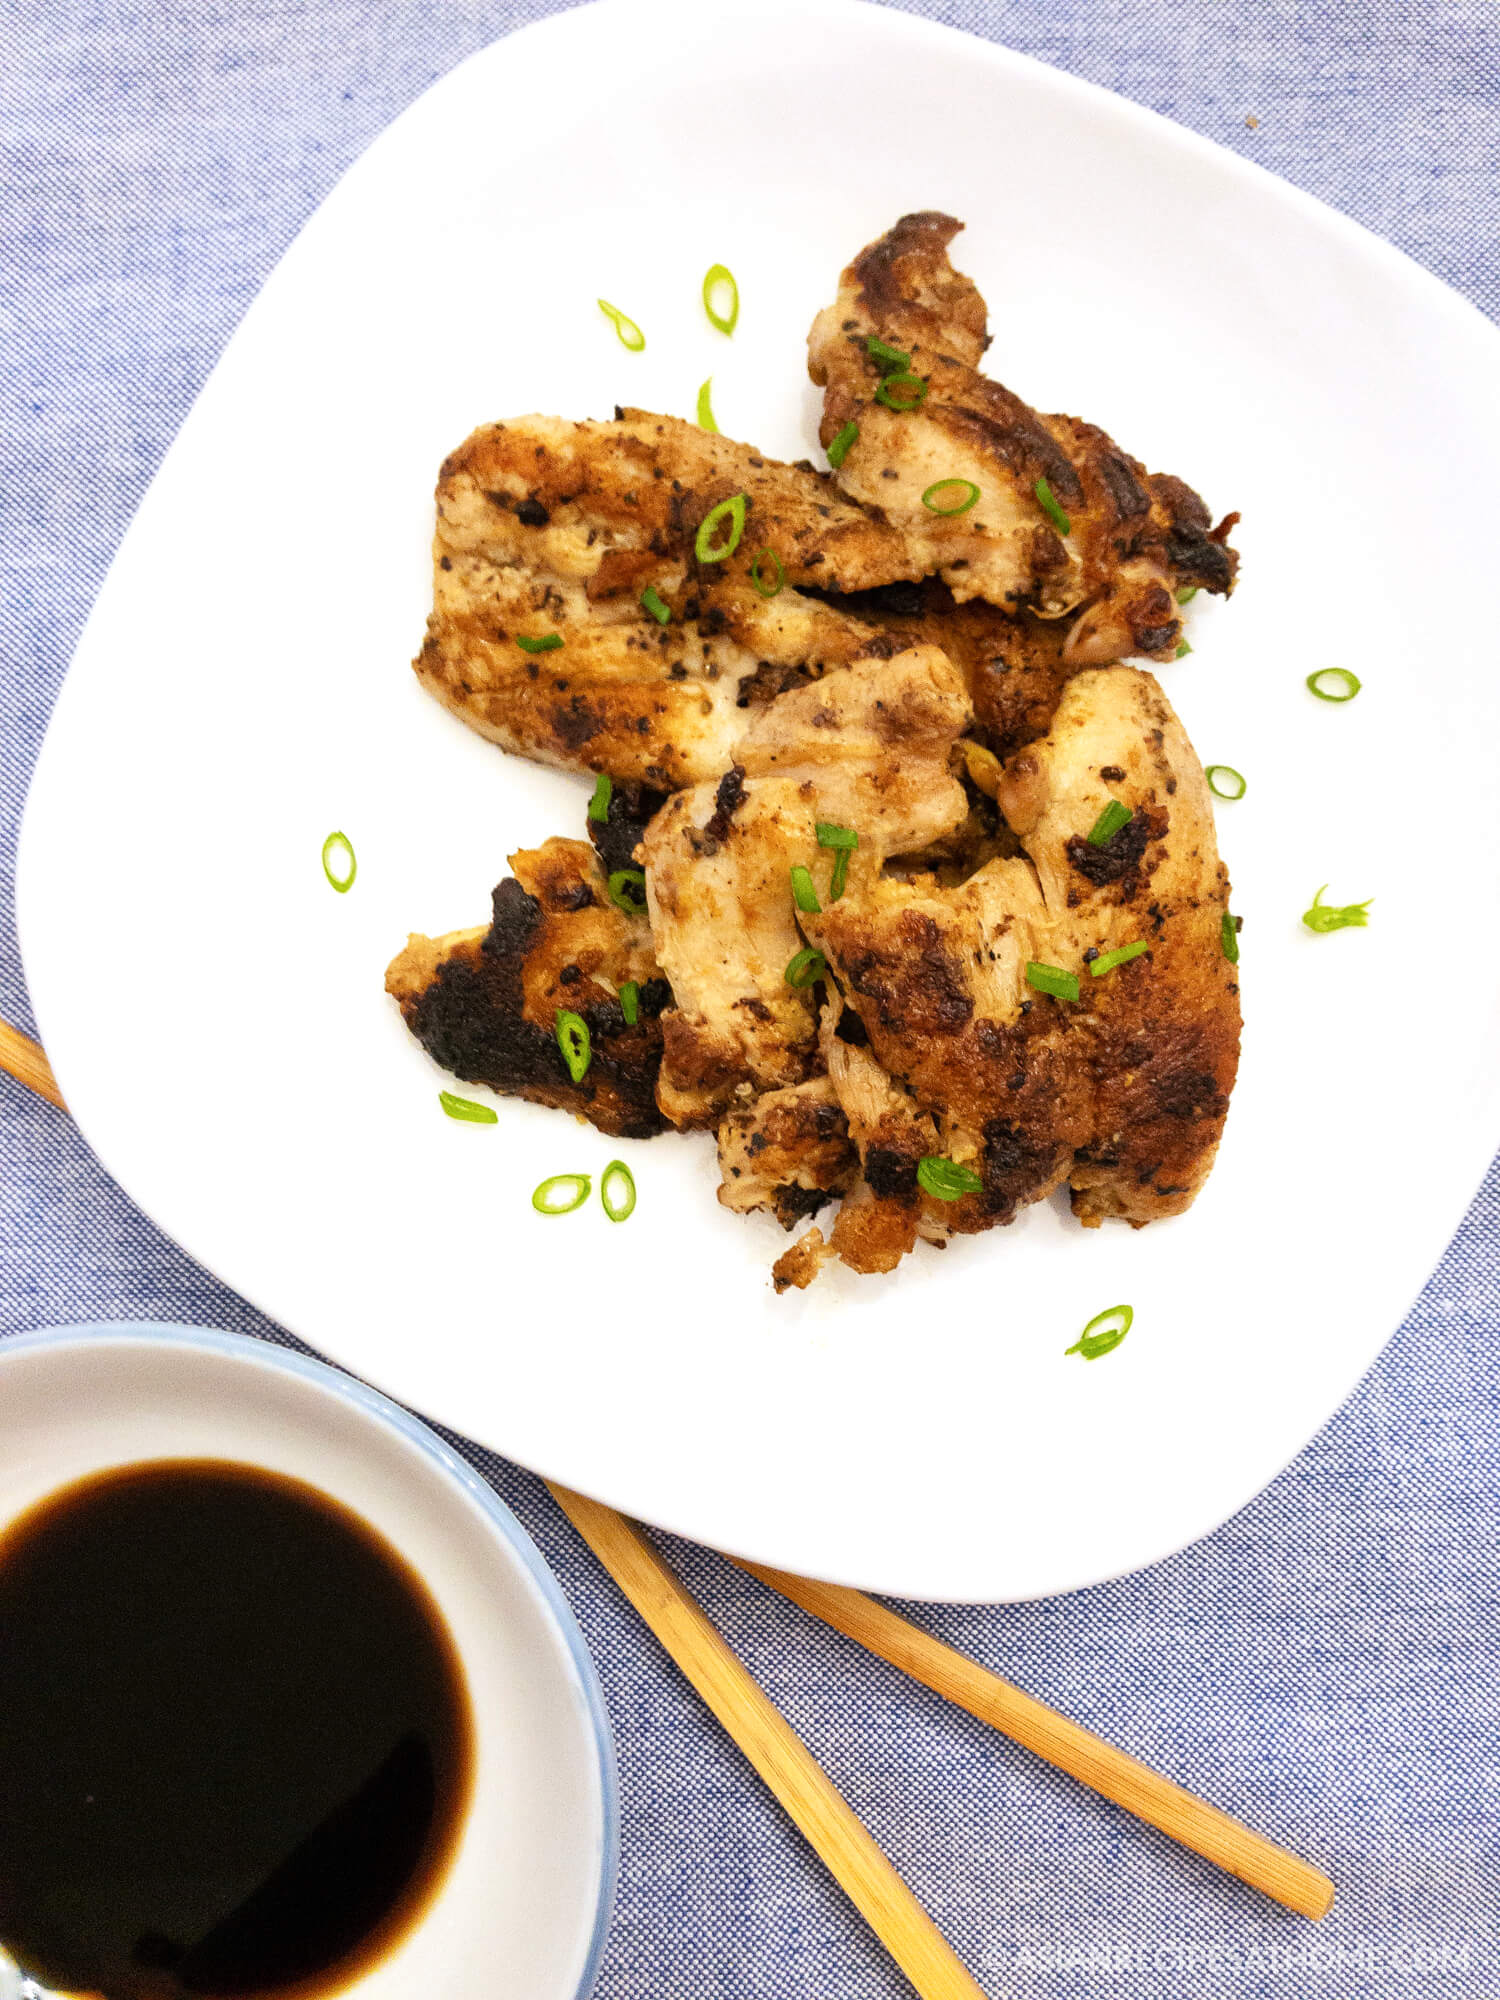 Cast Iron Asian Chicken – Browned seasoned chicken thighs are seared to perfection in a cast iron pan. This recipe is delicious, easy and healthy. It just so happens to be Paleo, gluten-free and Whole30 compliant as well.